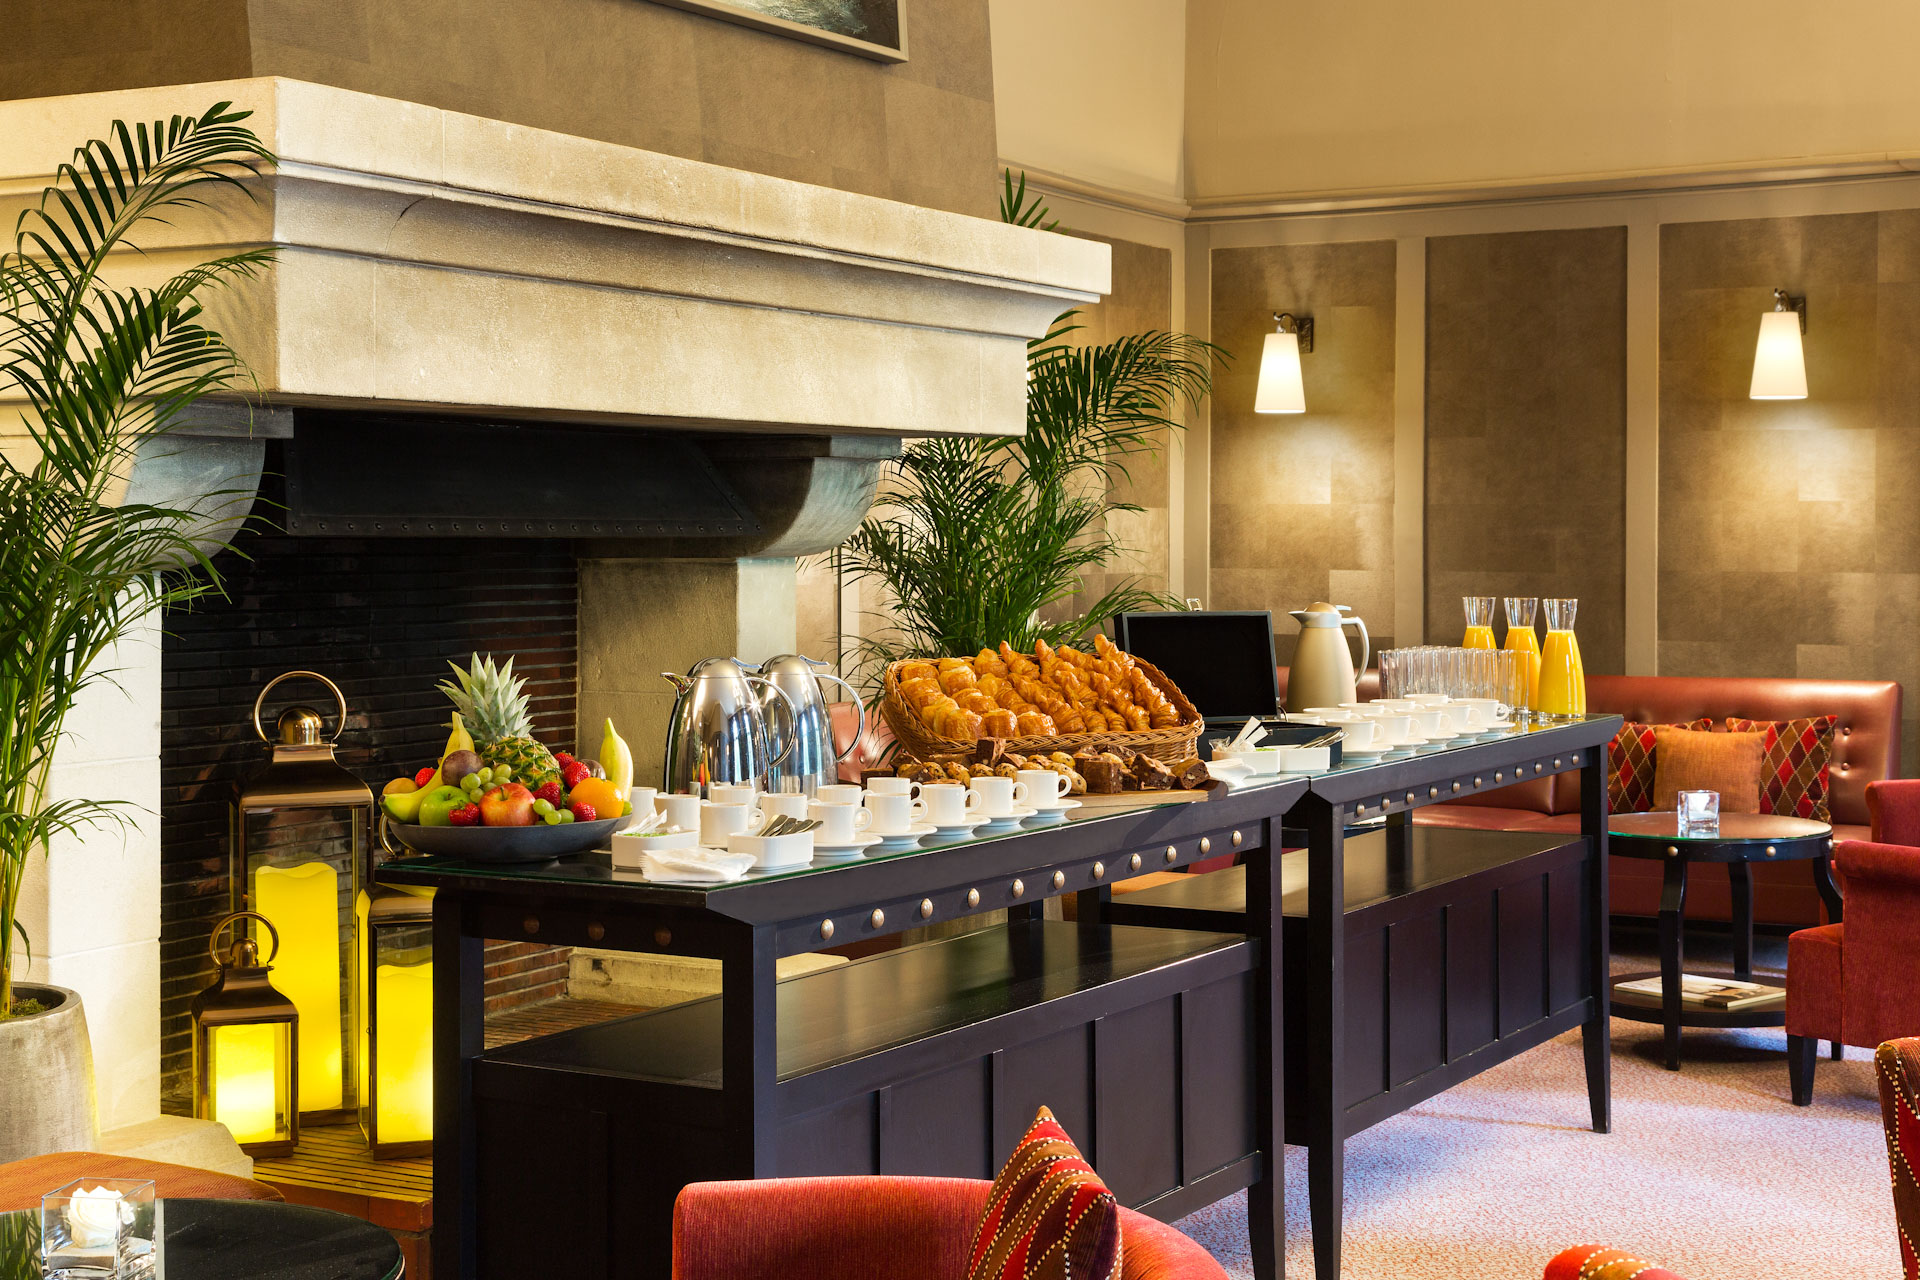 Breakfast at Hotel Barriere Le Westminster, Le Touquet, Northern France. Golf Planet Holidays